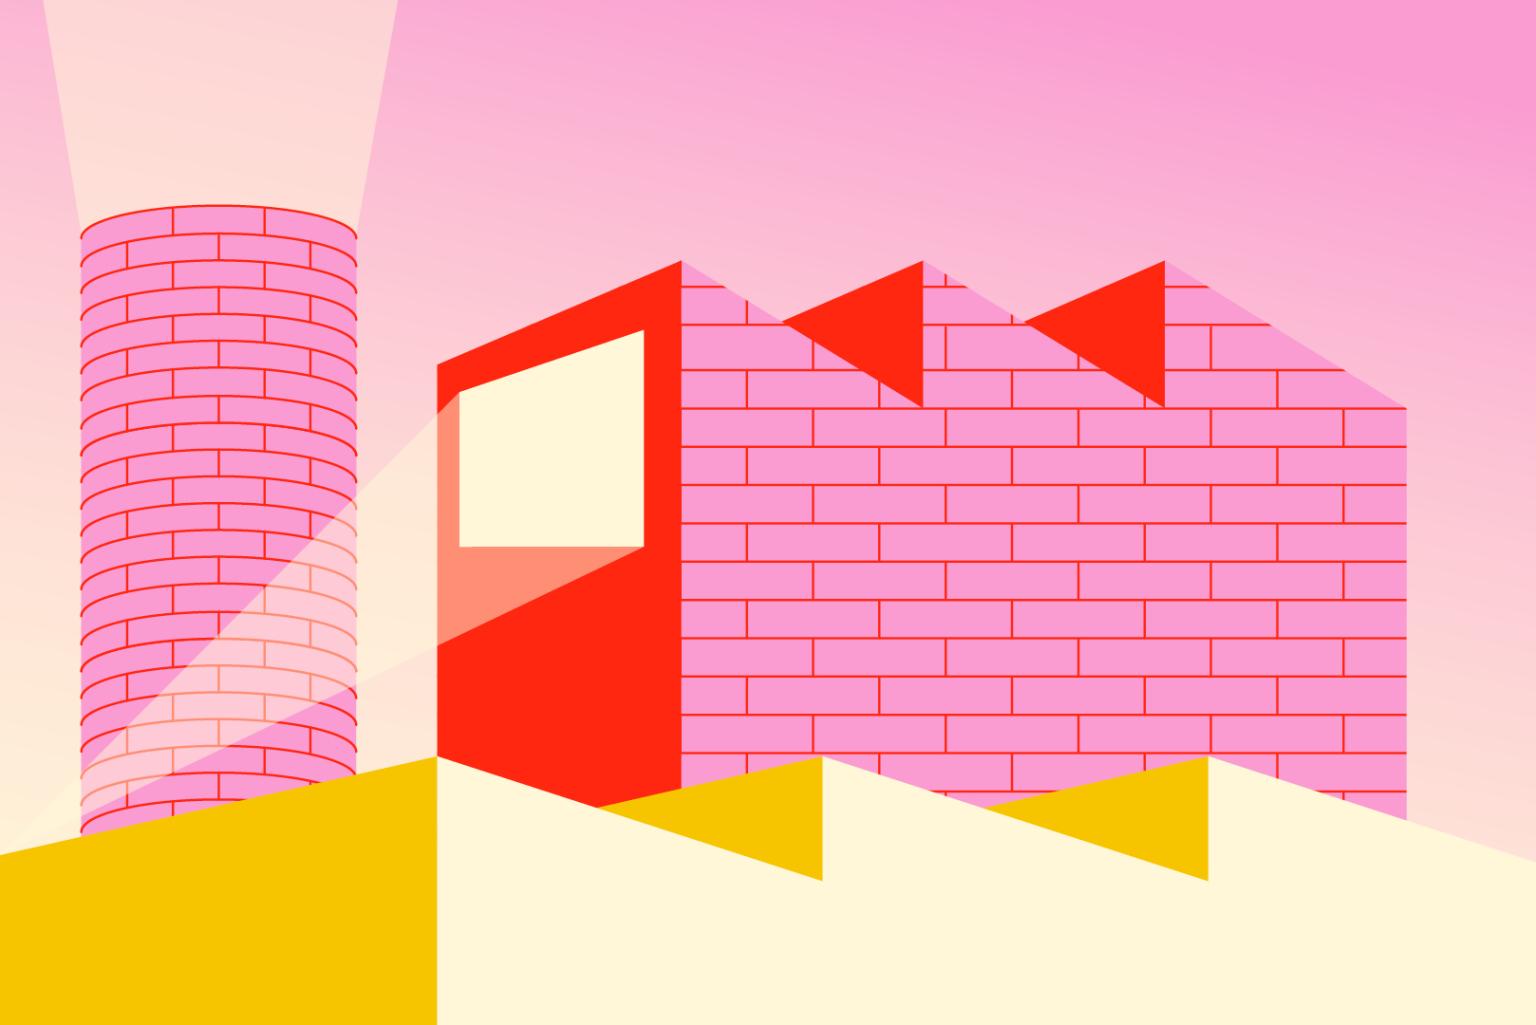 Graphic of a factory building with a round chimney, all made of pink bricks. The projection light of a cinema screen is visible at one of the walls.